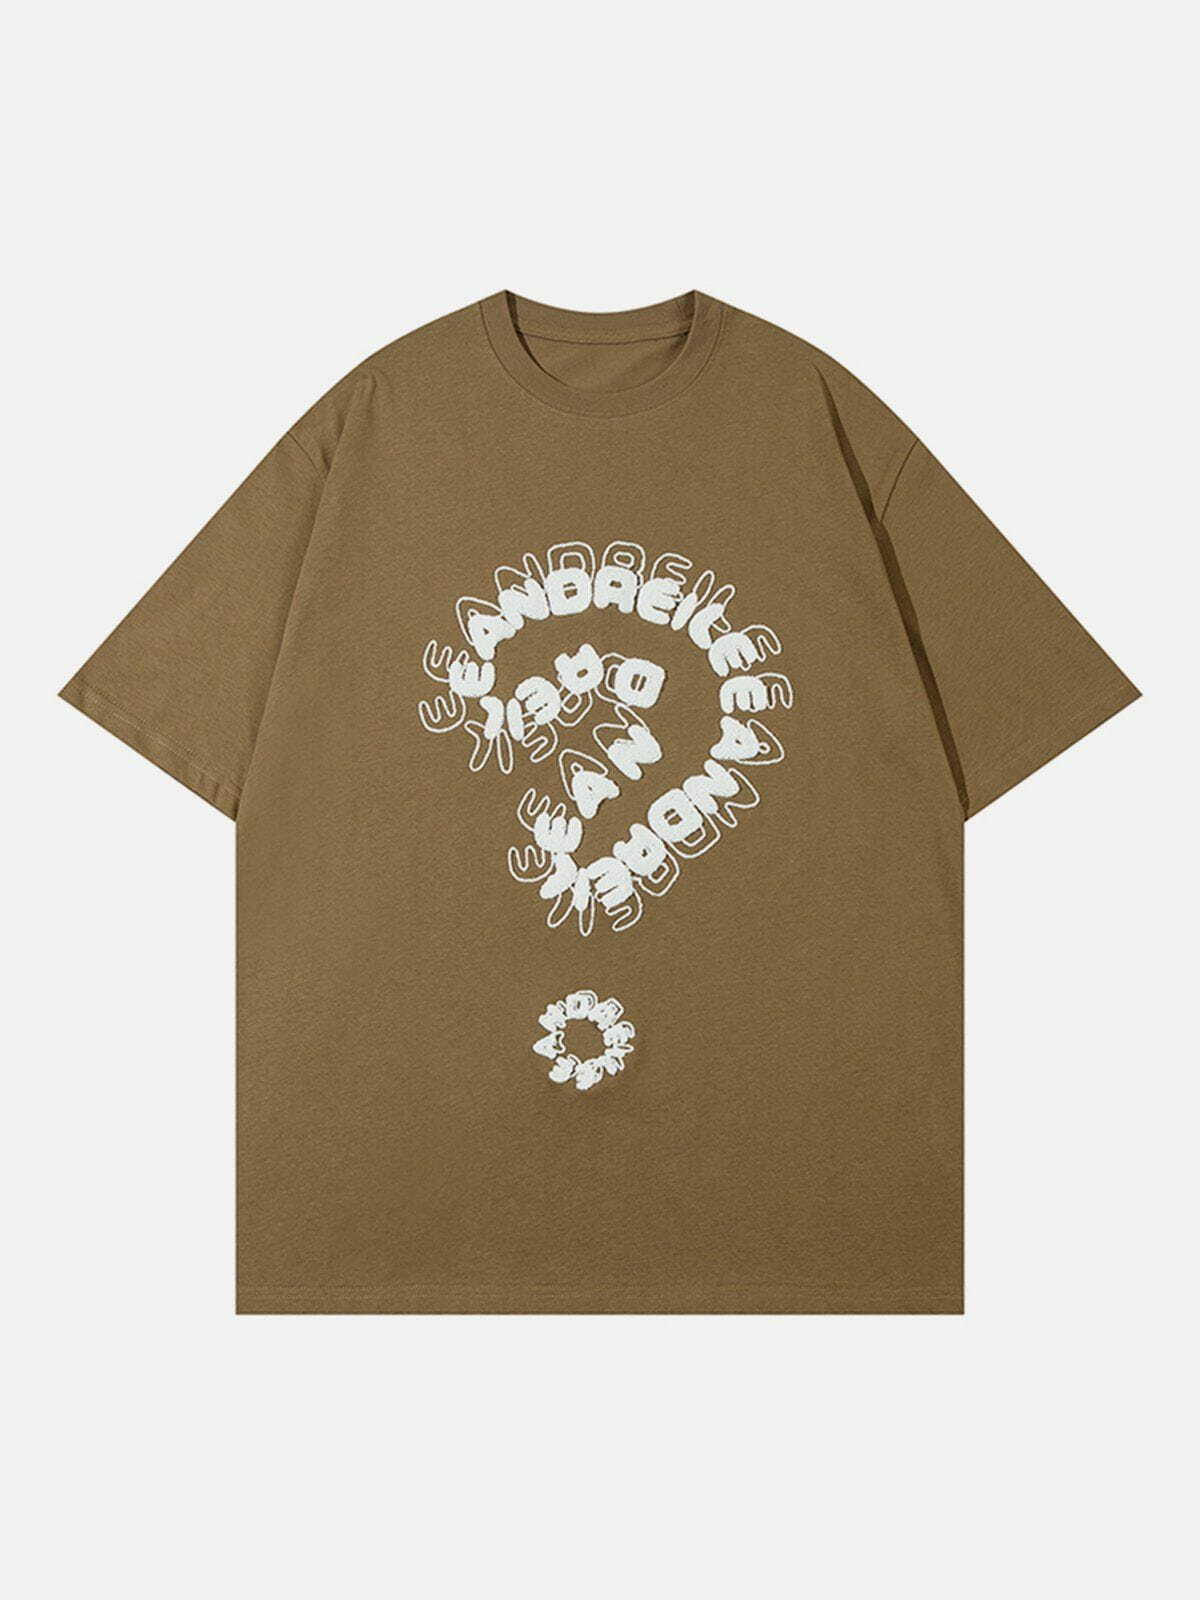 embroidered question mark tee quirky & streetwear iconic 5488